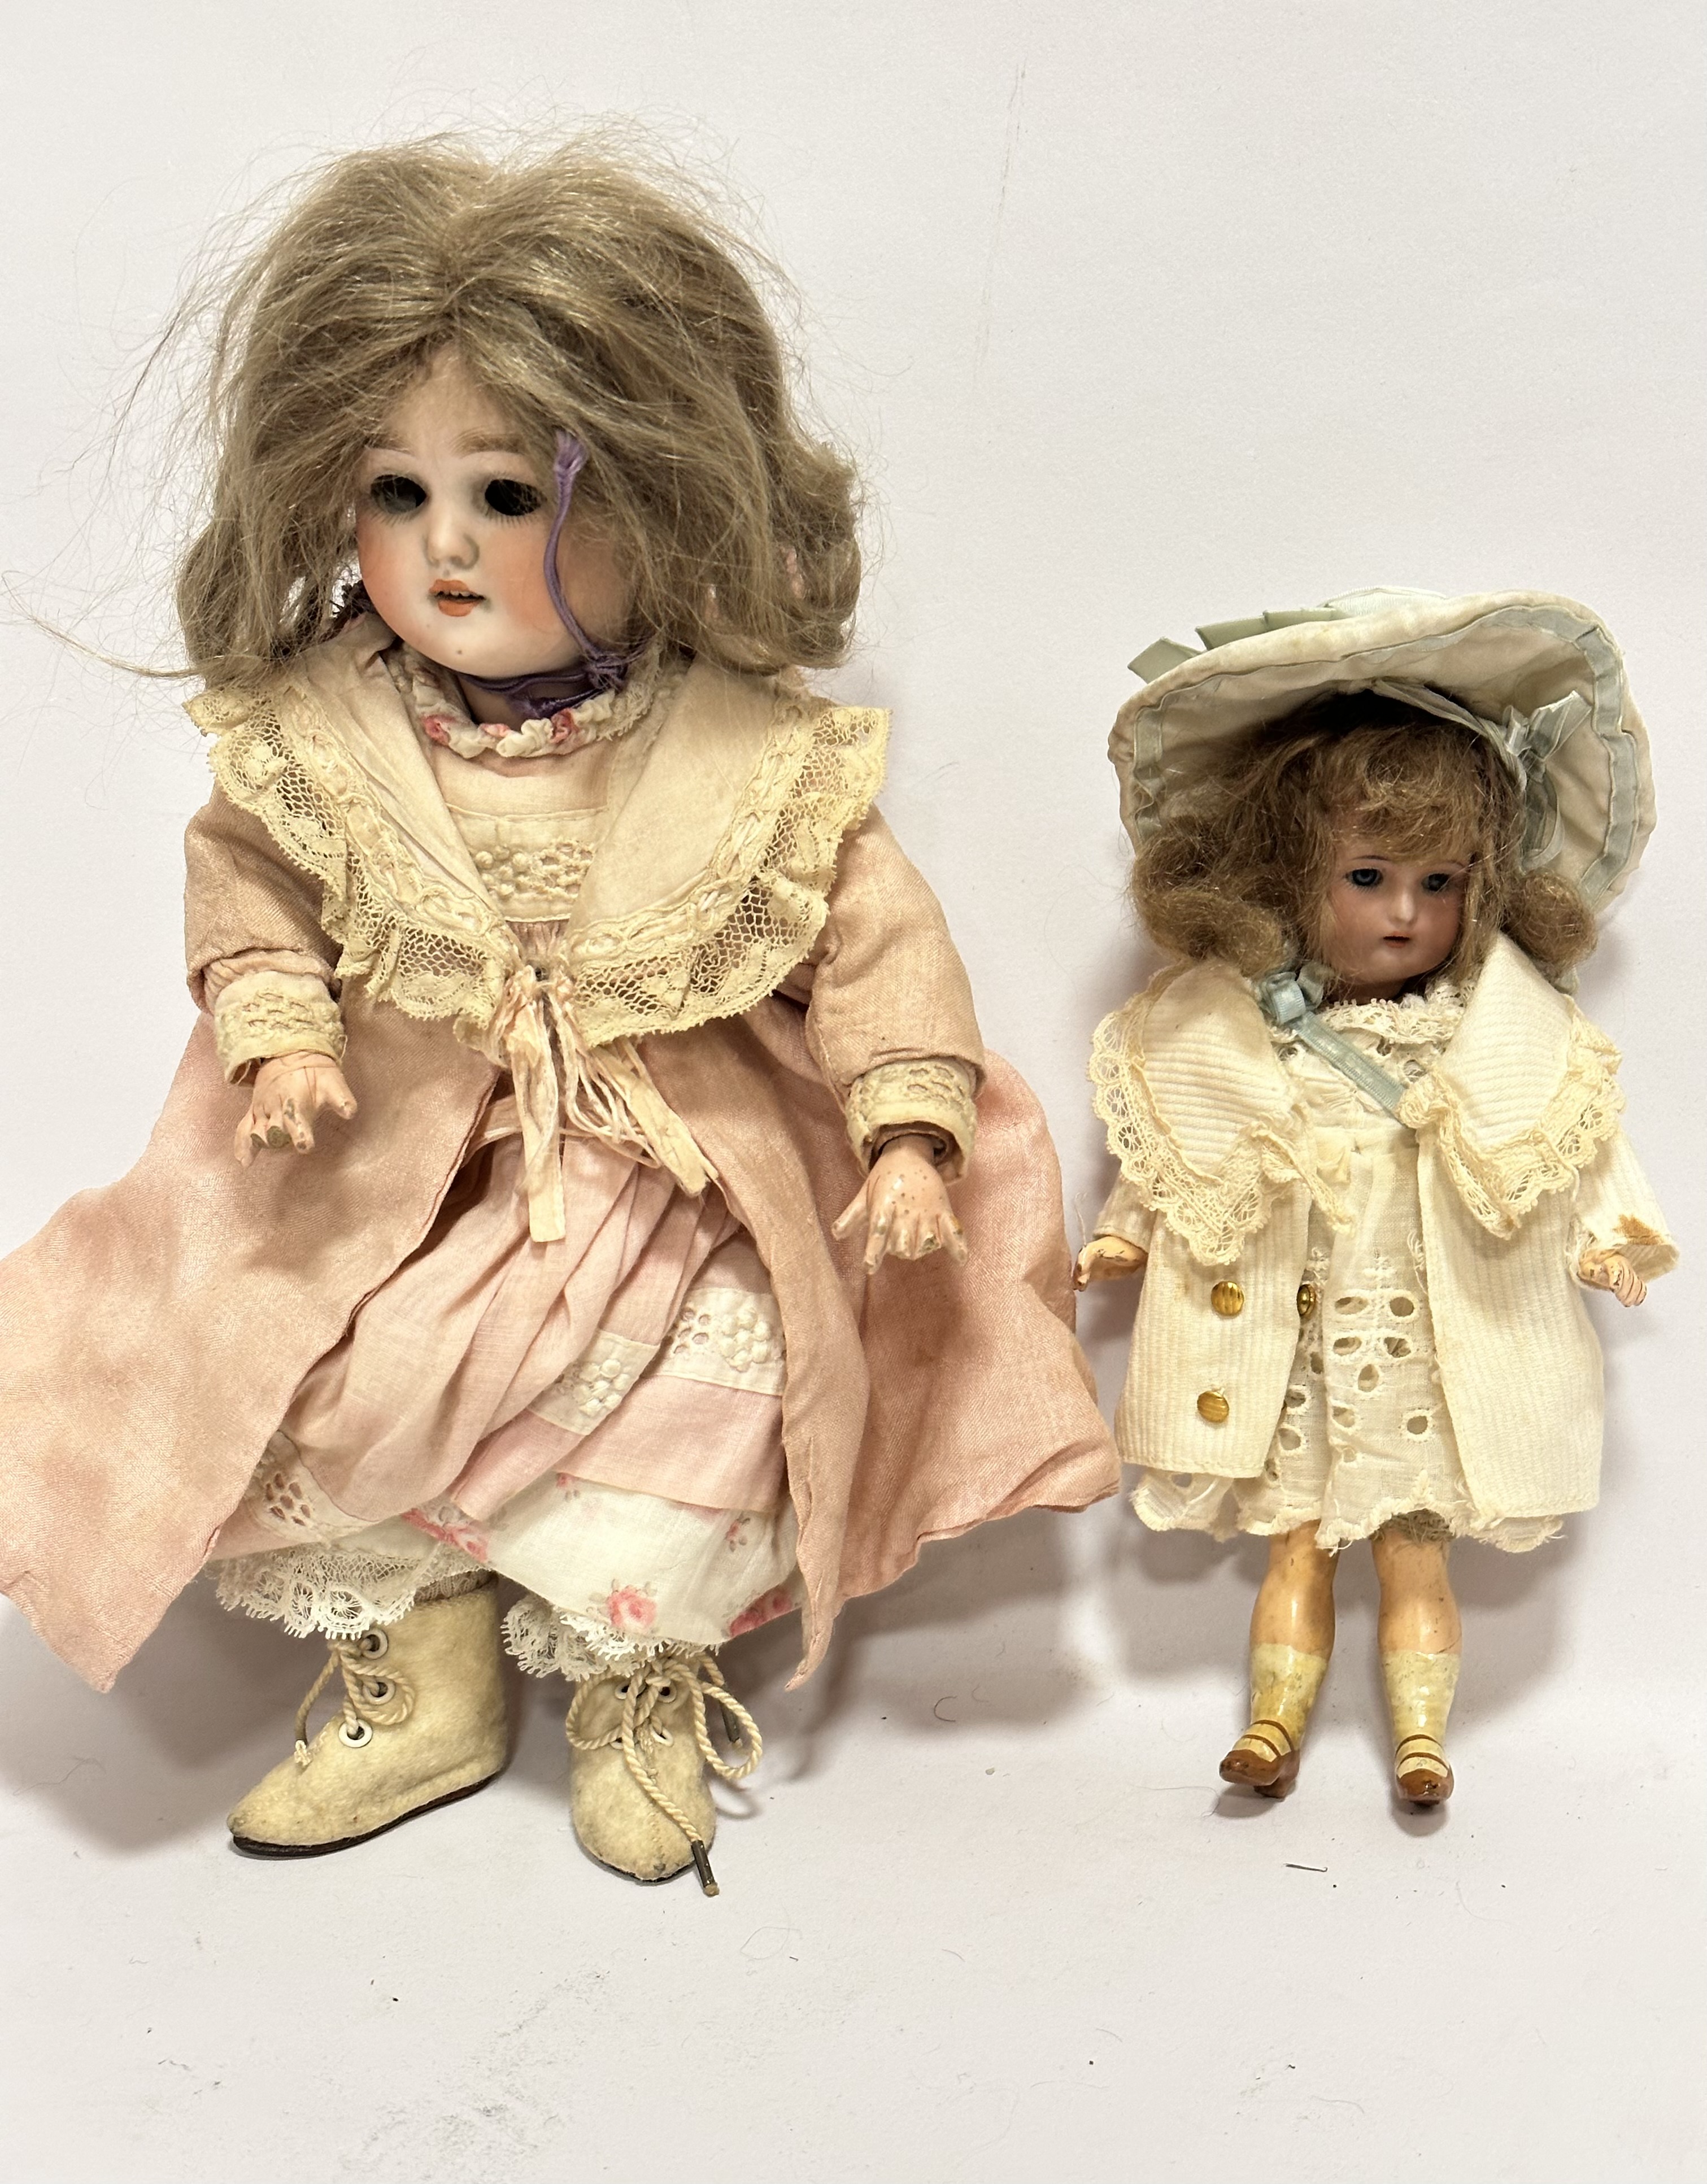 A late 19thc Simon & Halbig German bisque head doll with natural hair, 58007710, with jointed